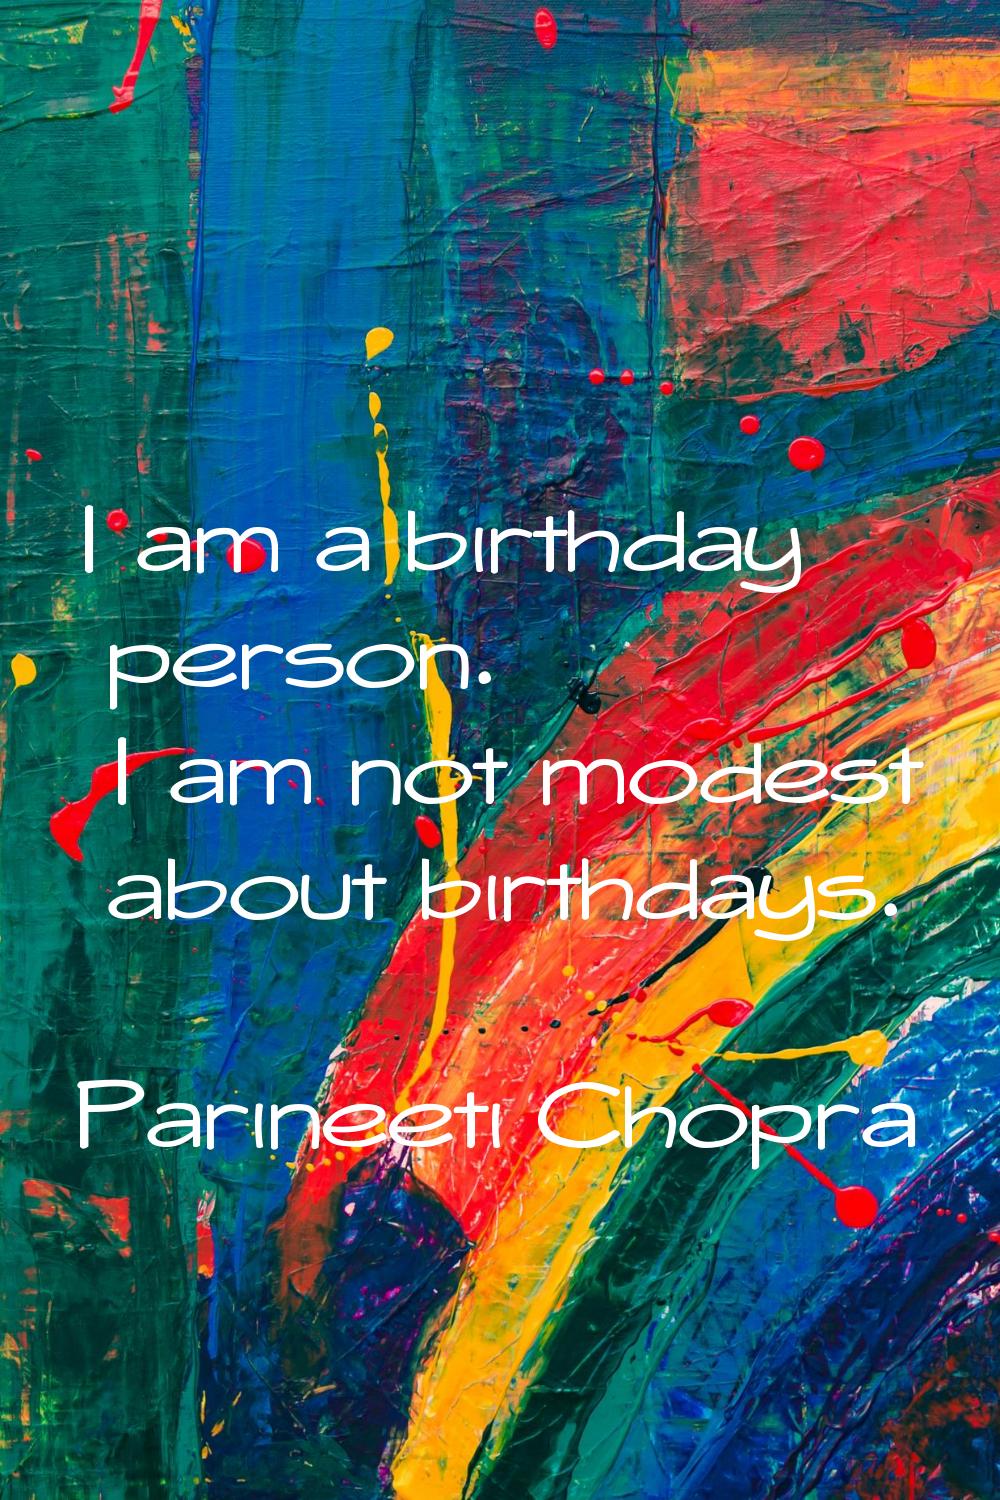 I am a birthday person. I am not modest about birthdays.